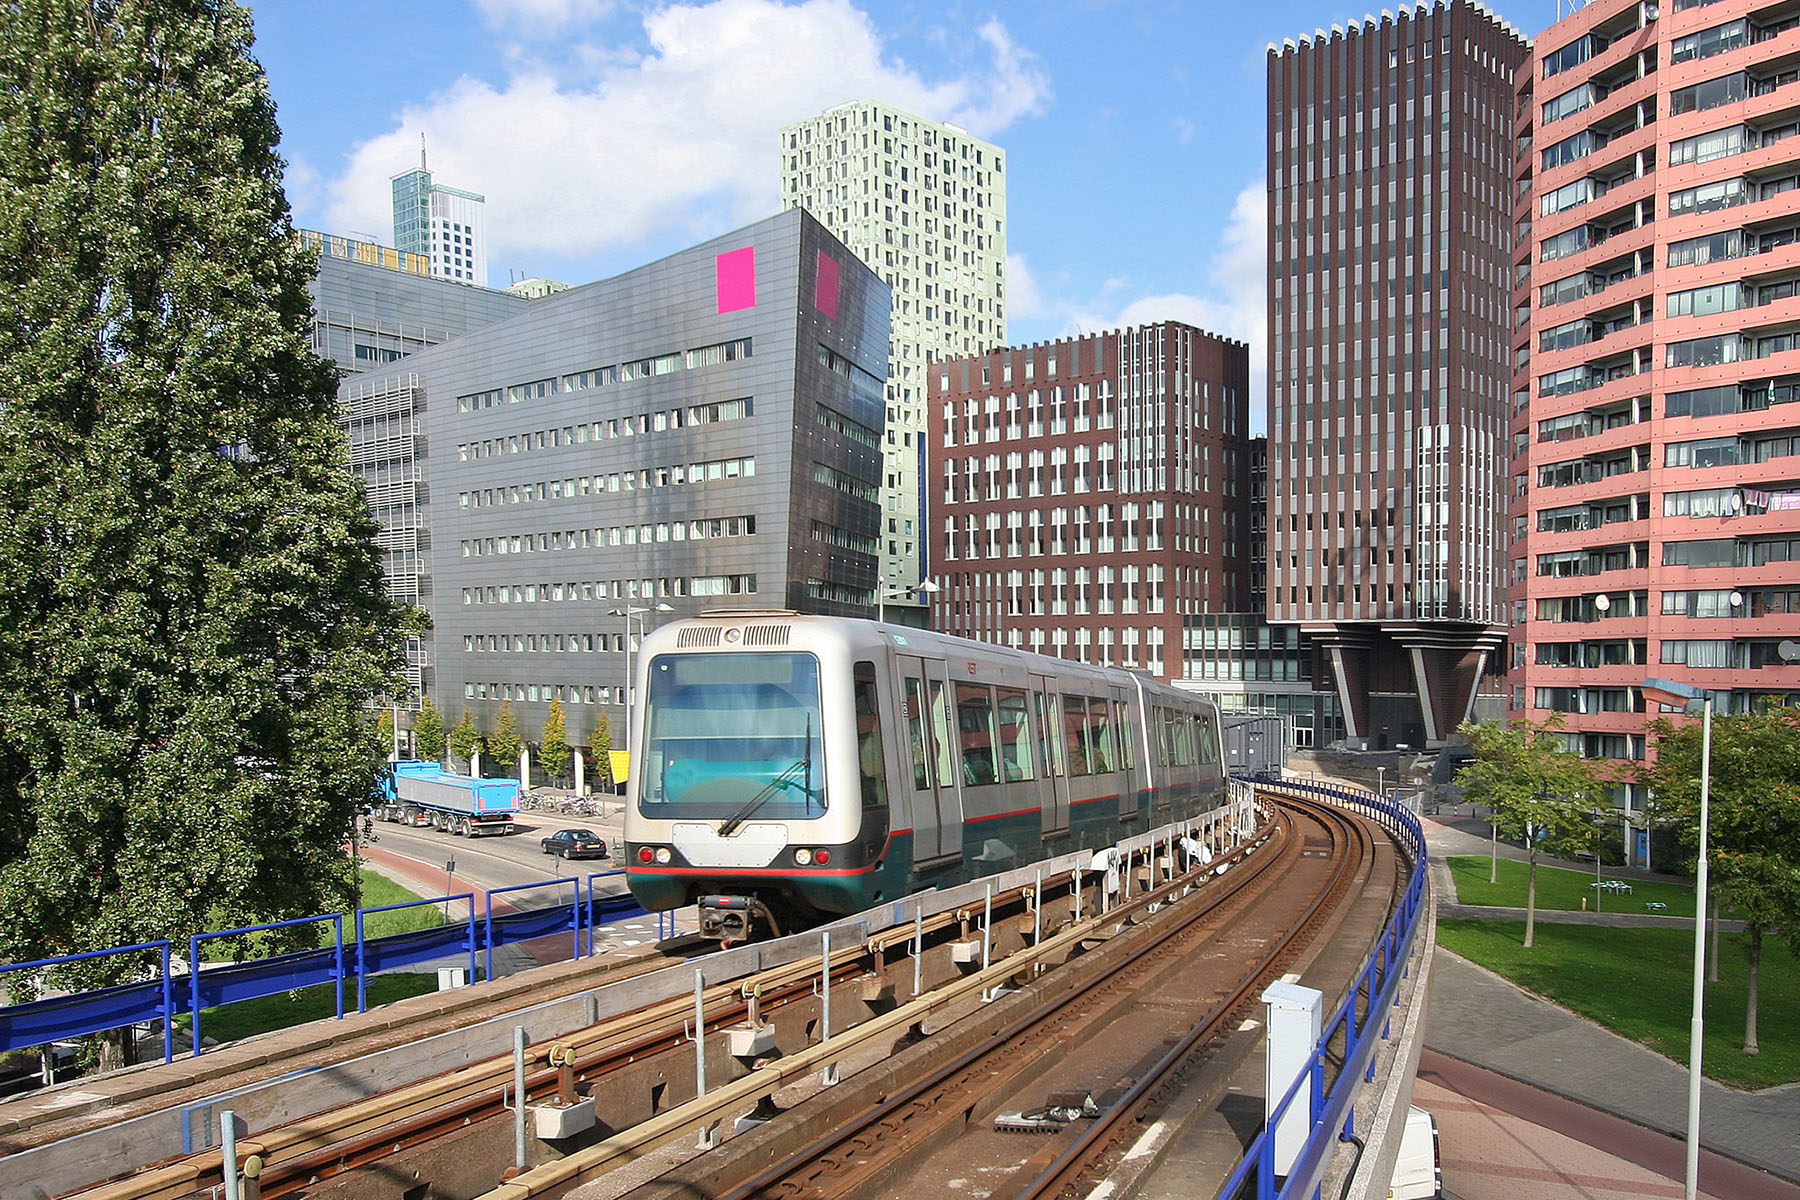 Metro is leaving station Maashaven in Rotterdam, with buildings in the background. 